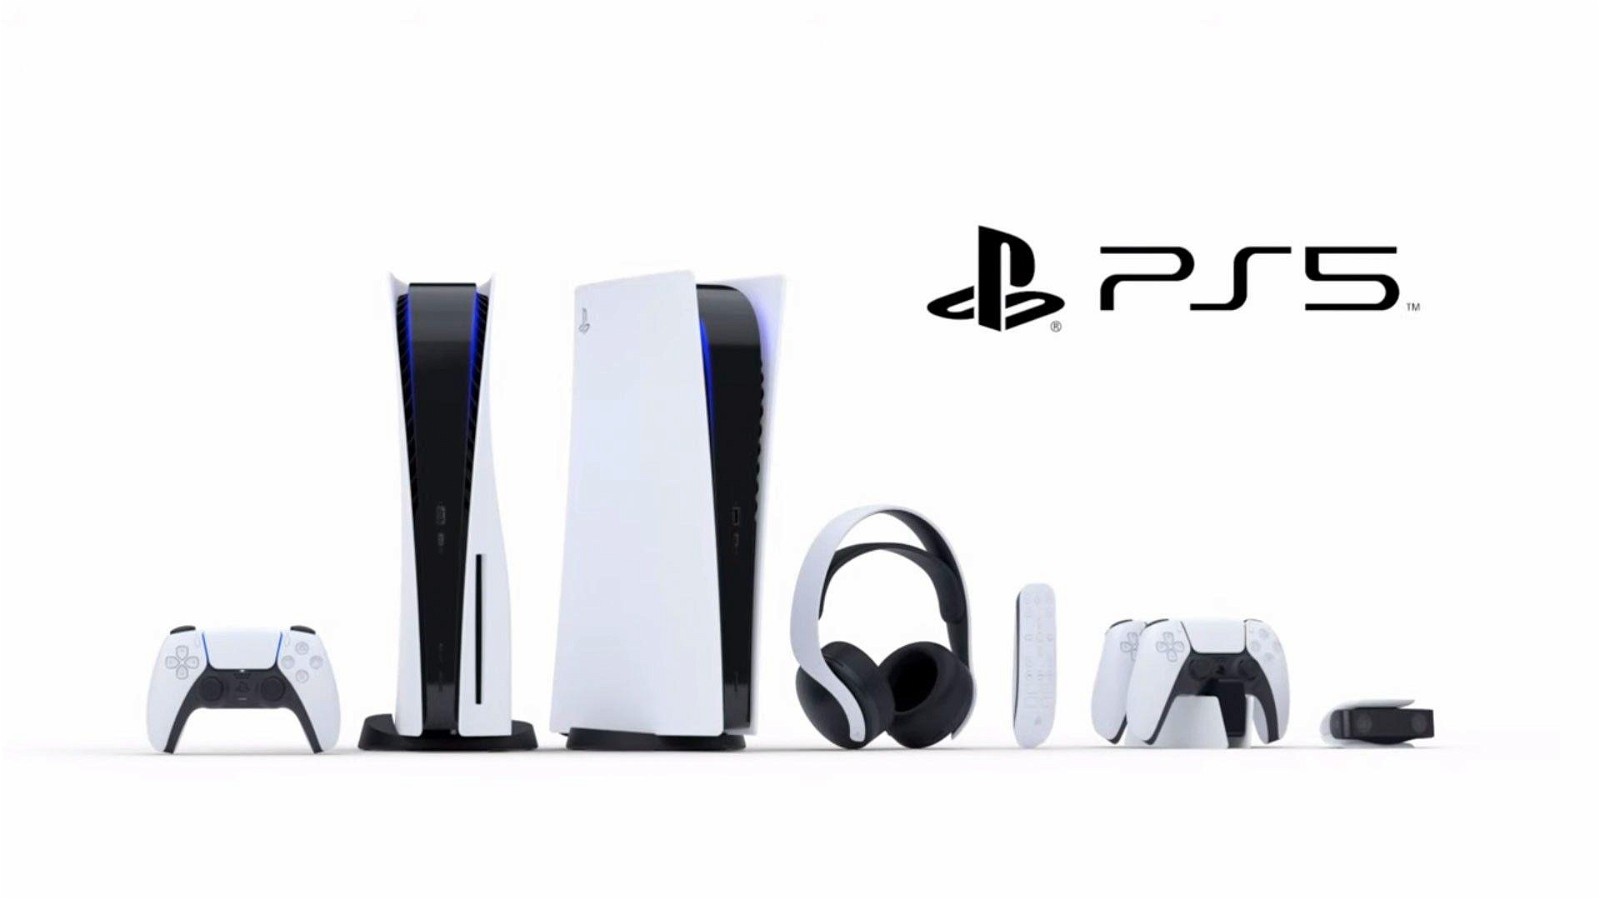 Could the PS5 Slim Be the Newest Addition to the PlayStation 5 Family?